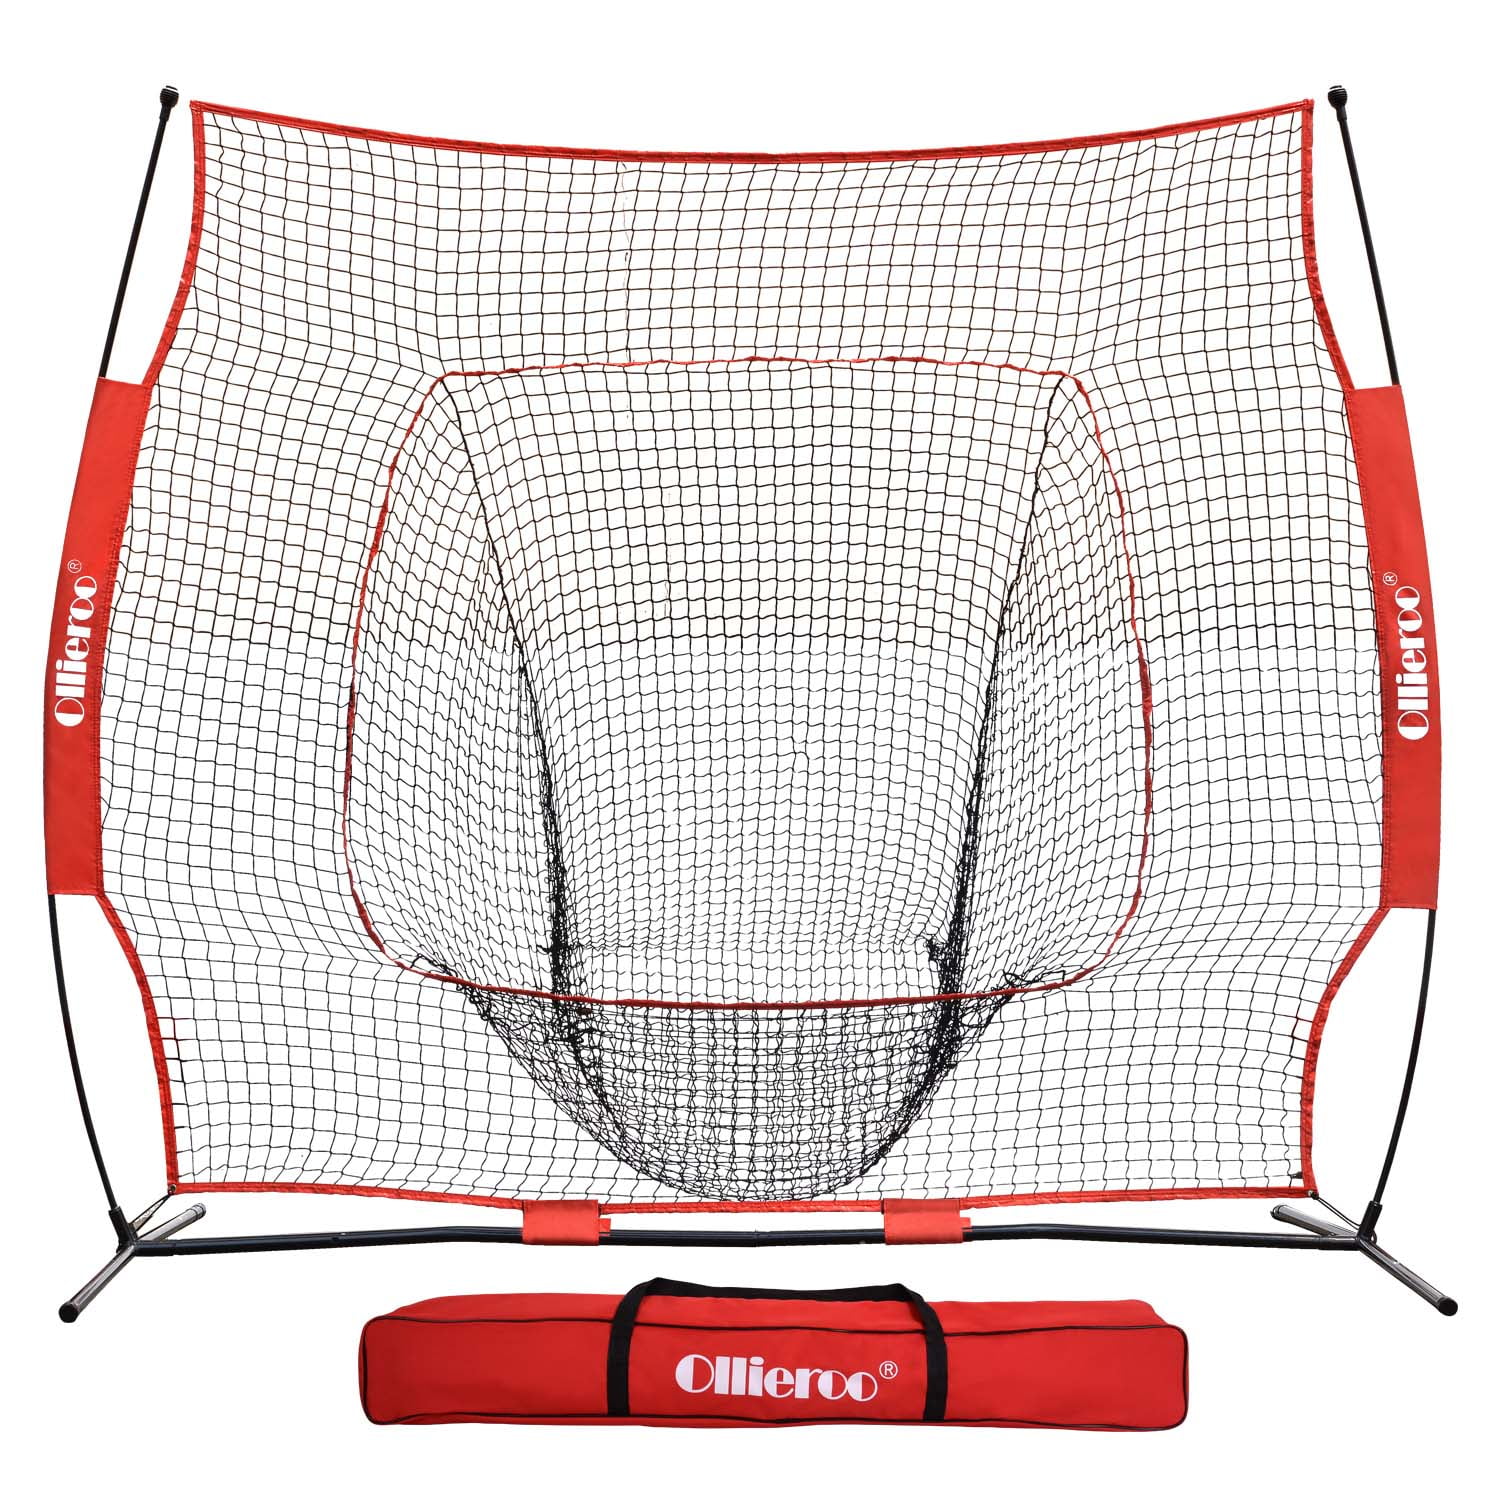 Ollieroo 7&amp;#39;x7 Baseball and Softball Practice Net for Hitting, Pitching, Backstop Screen Equipment Training Aids Red / Black, Includes Carry Bag